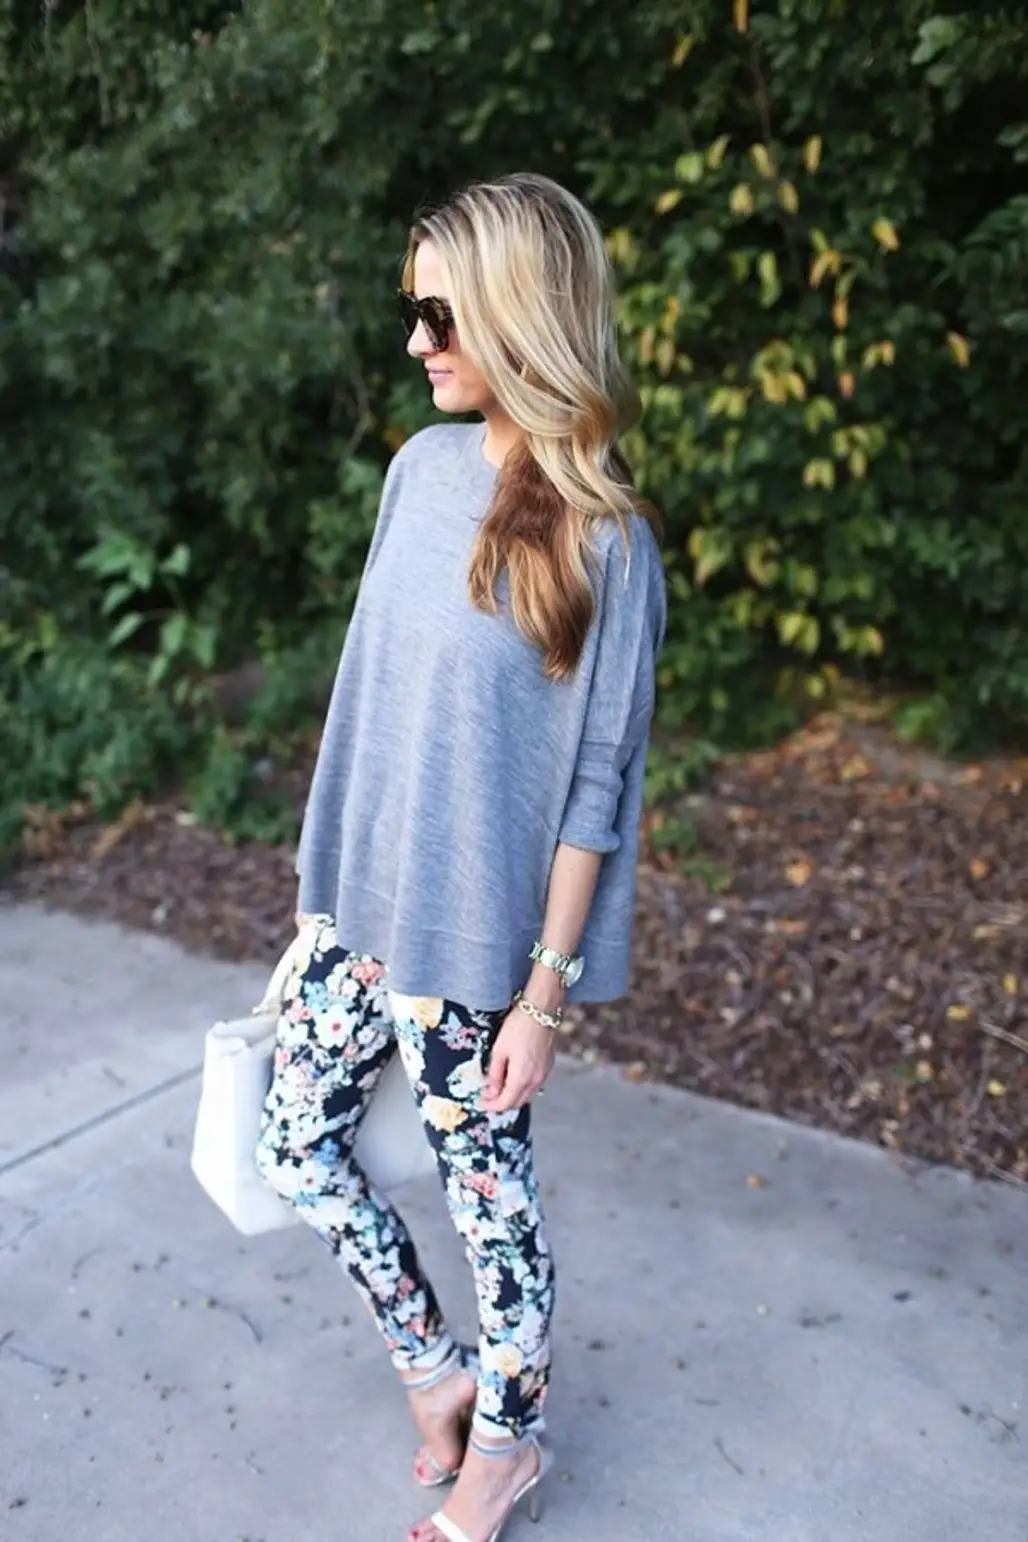 Do you have any tips for styling printed or patterned pants in an